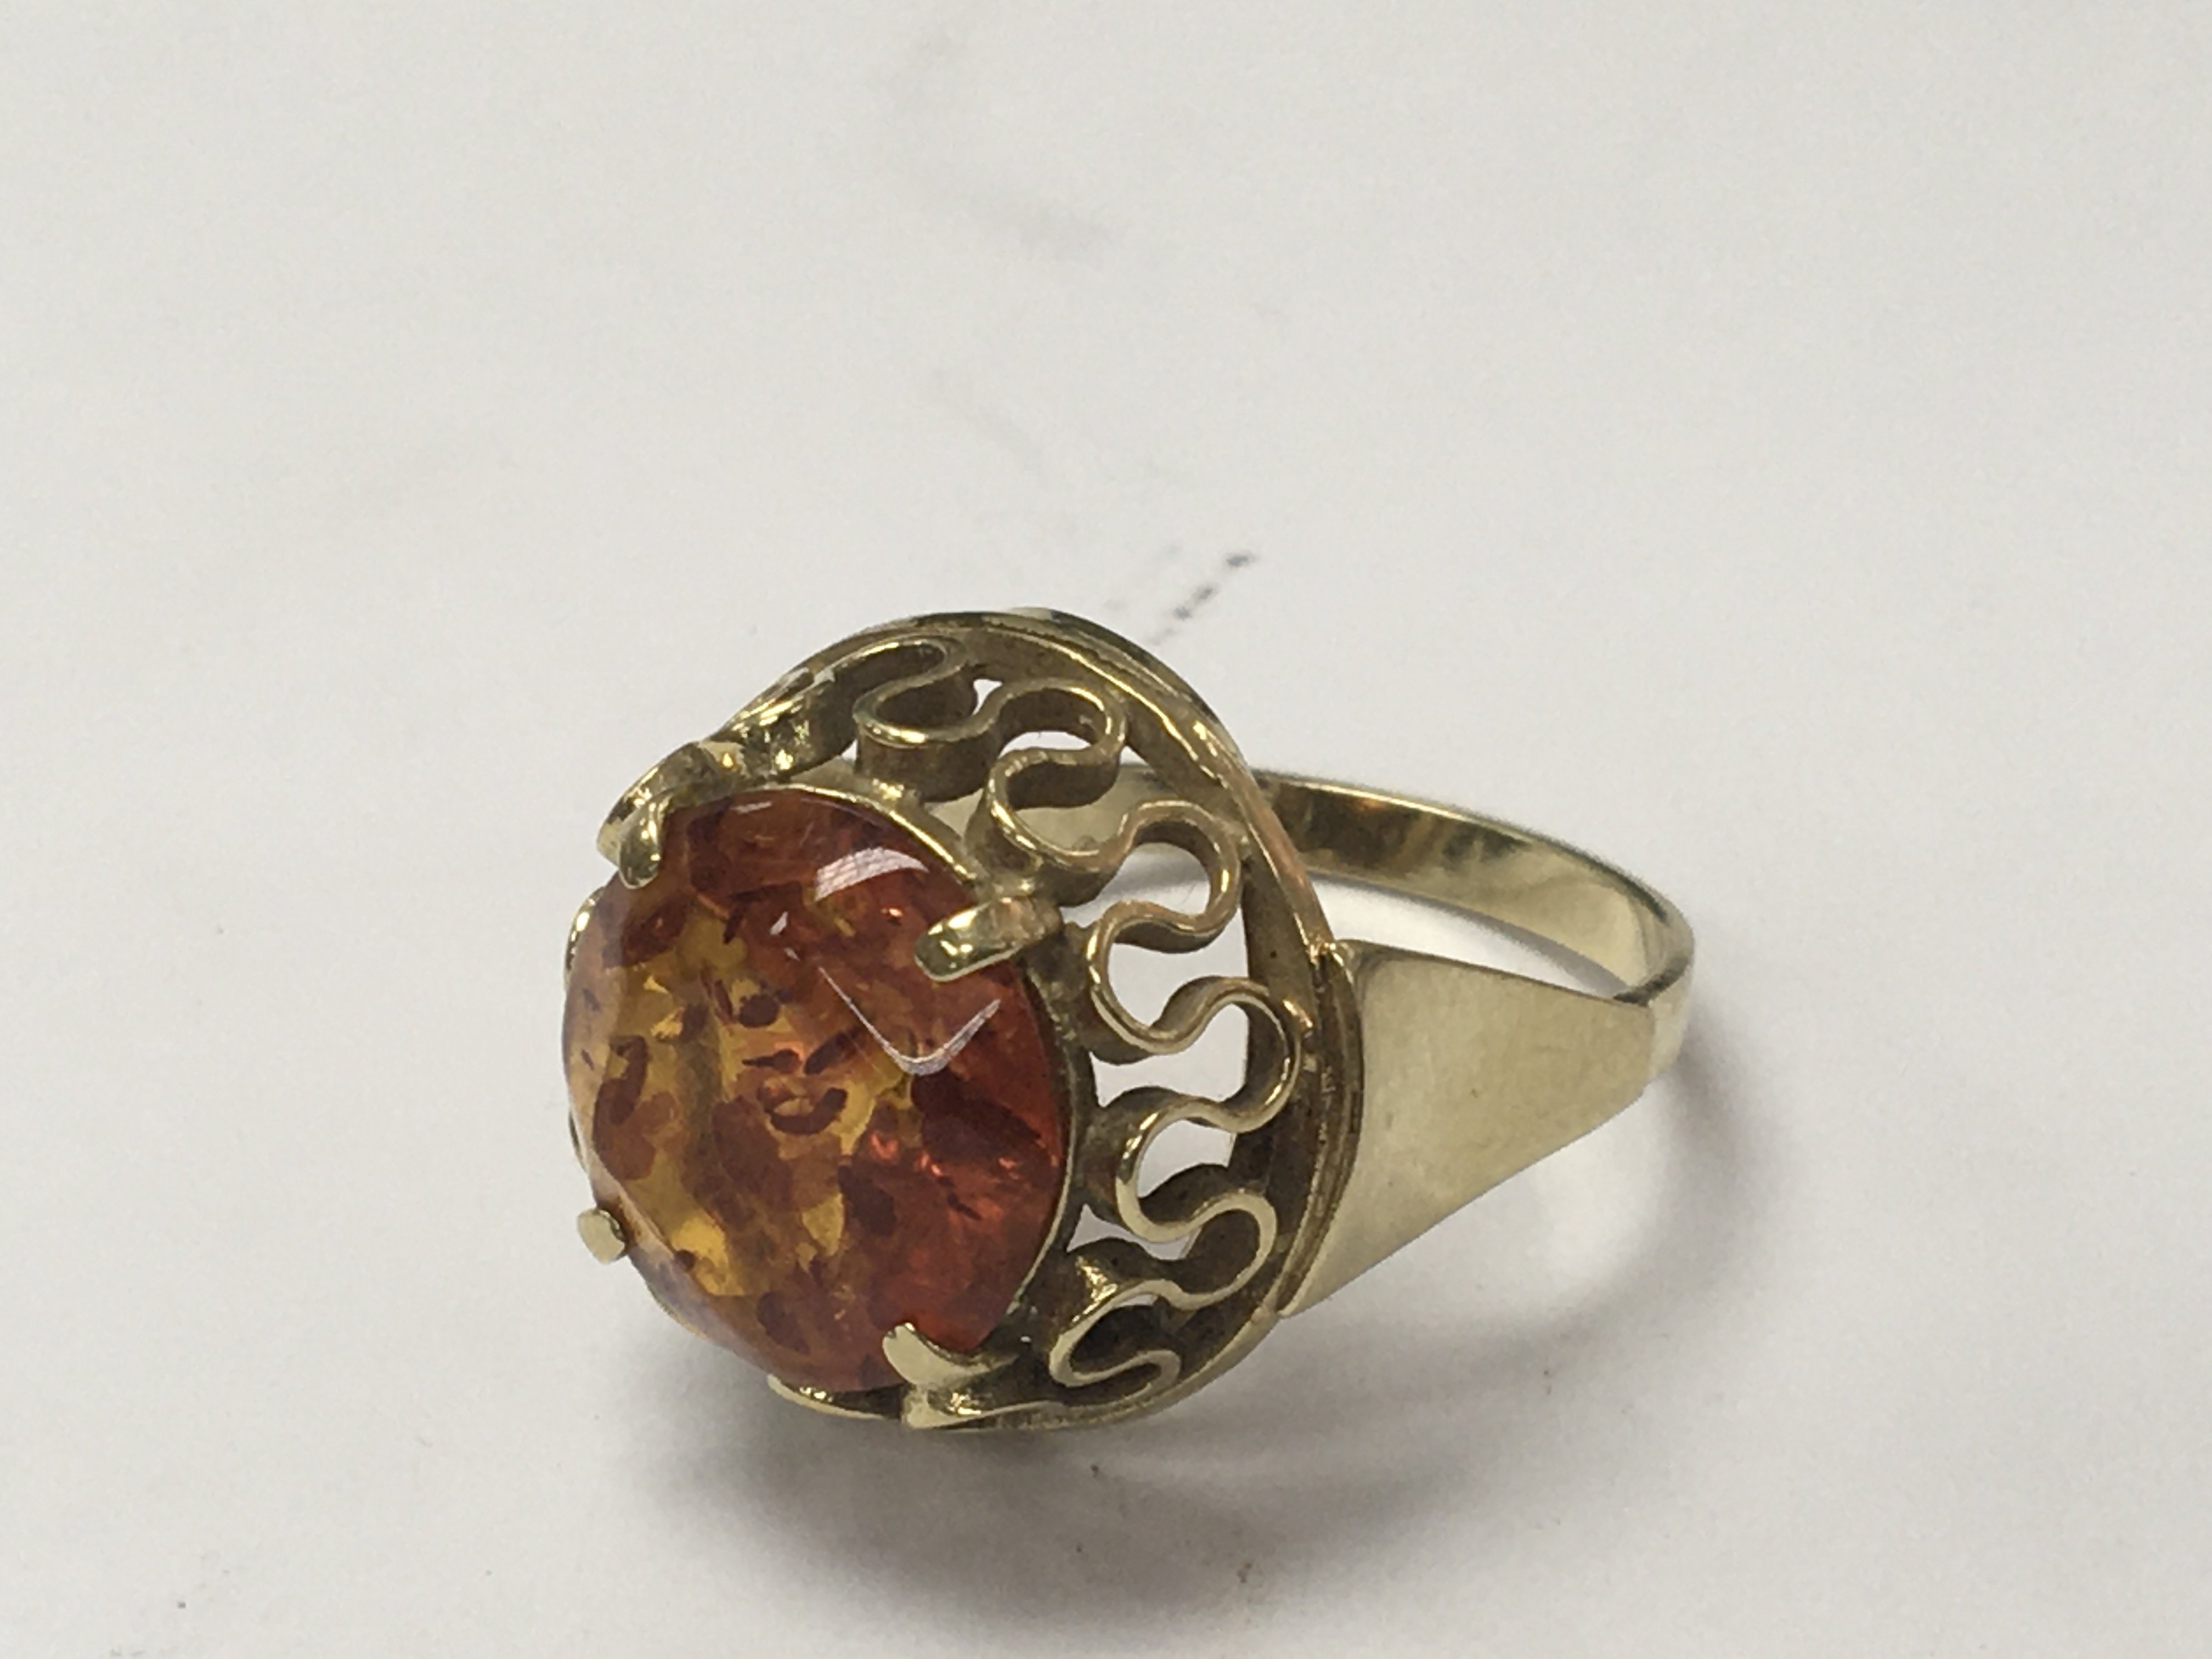 A gold ring stamped 585 inset with an amber stone